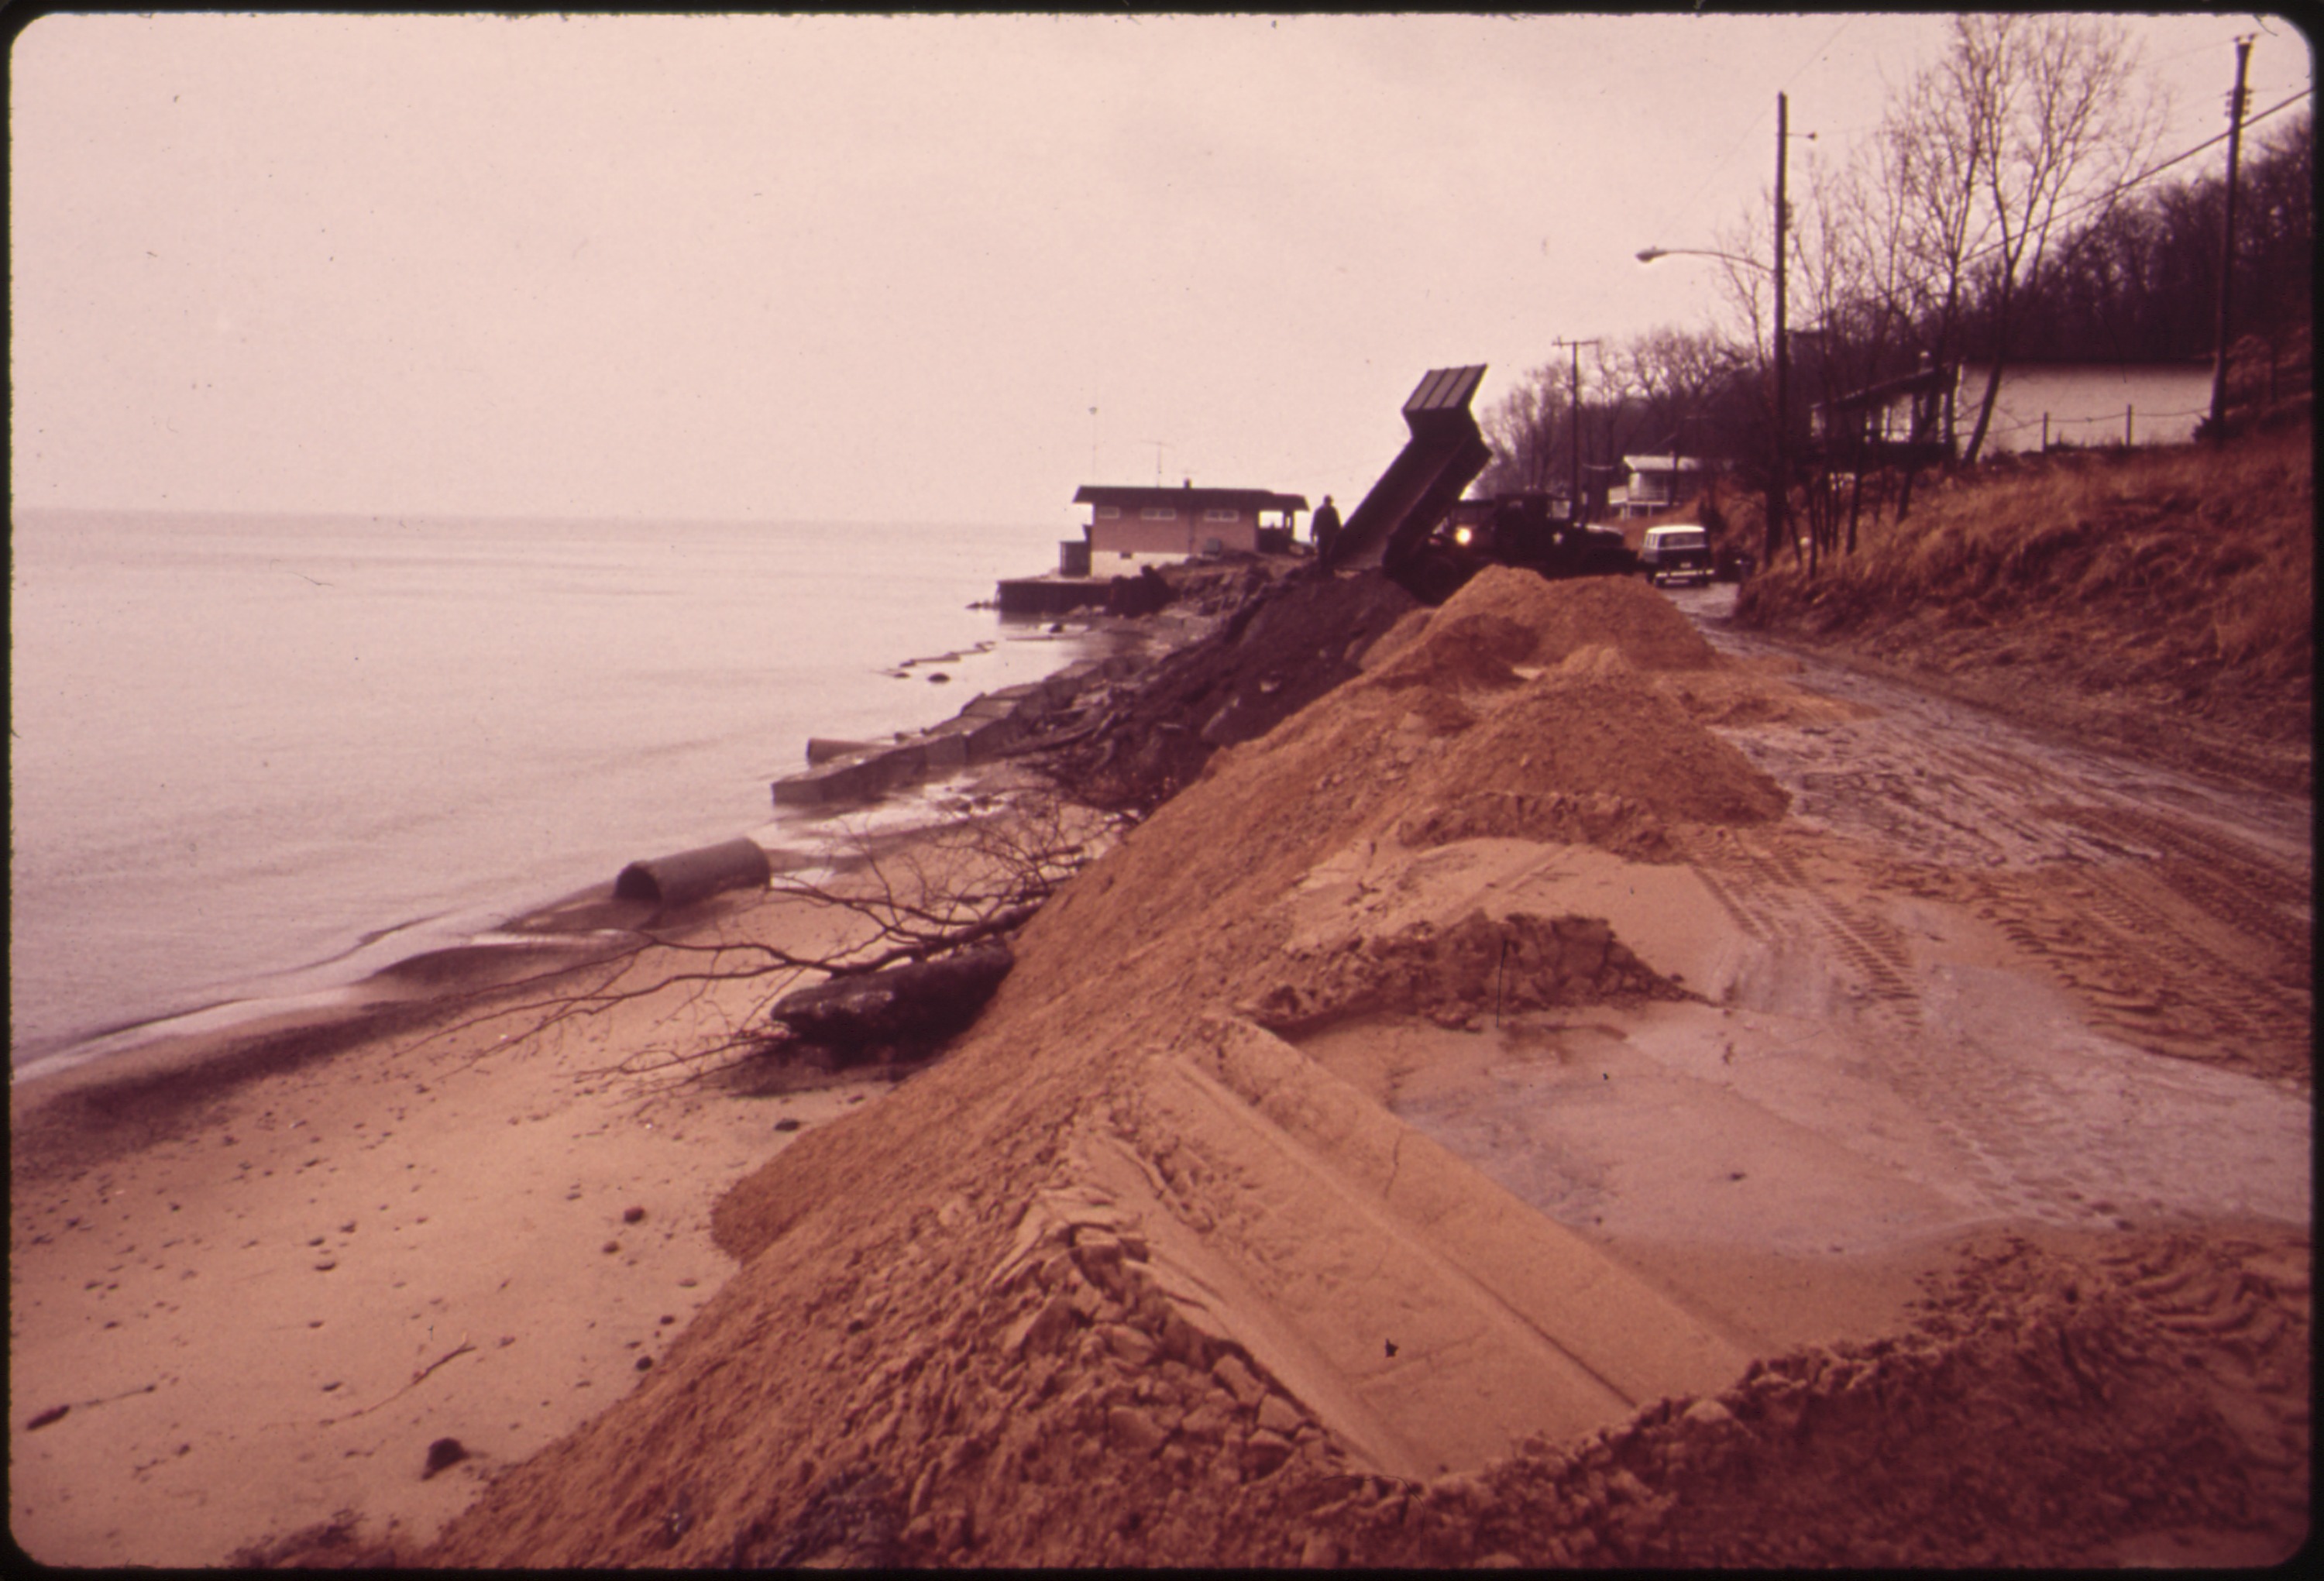 BACKGROUND IS THREATENED BY BEACH EROSION US ARMY CORPS OF ENGINEERS